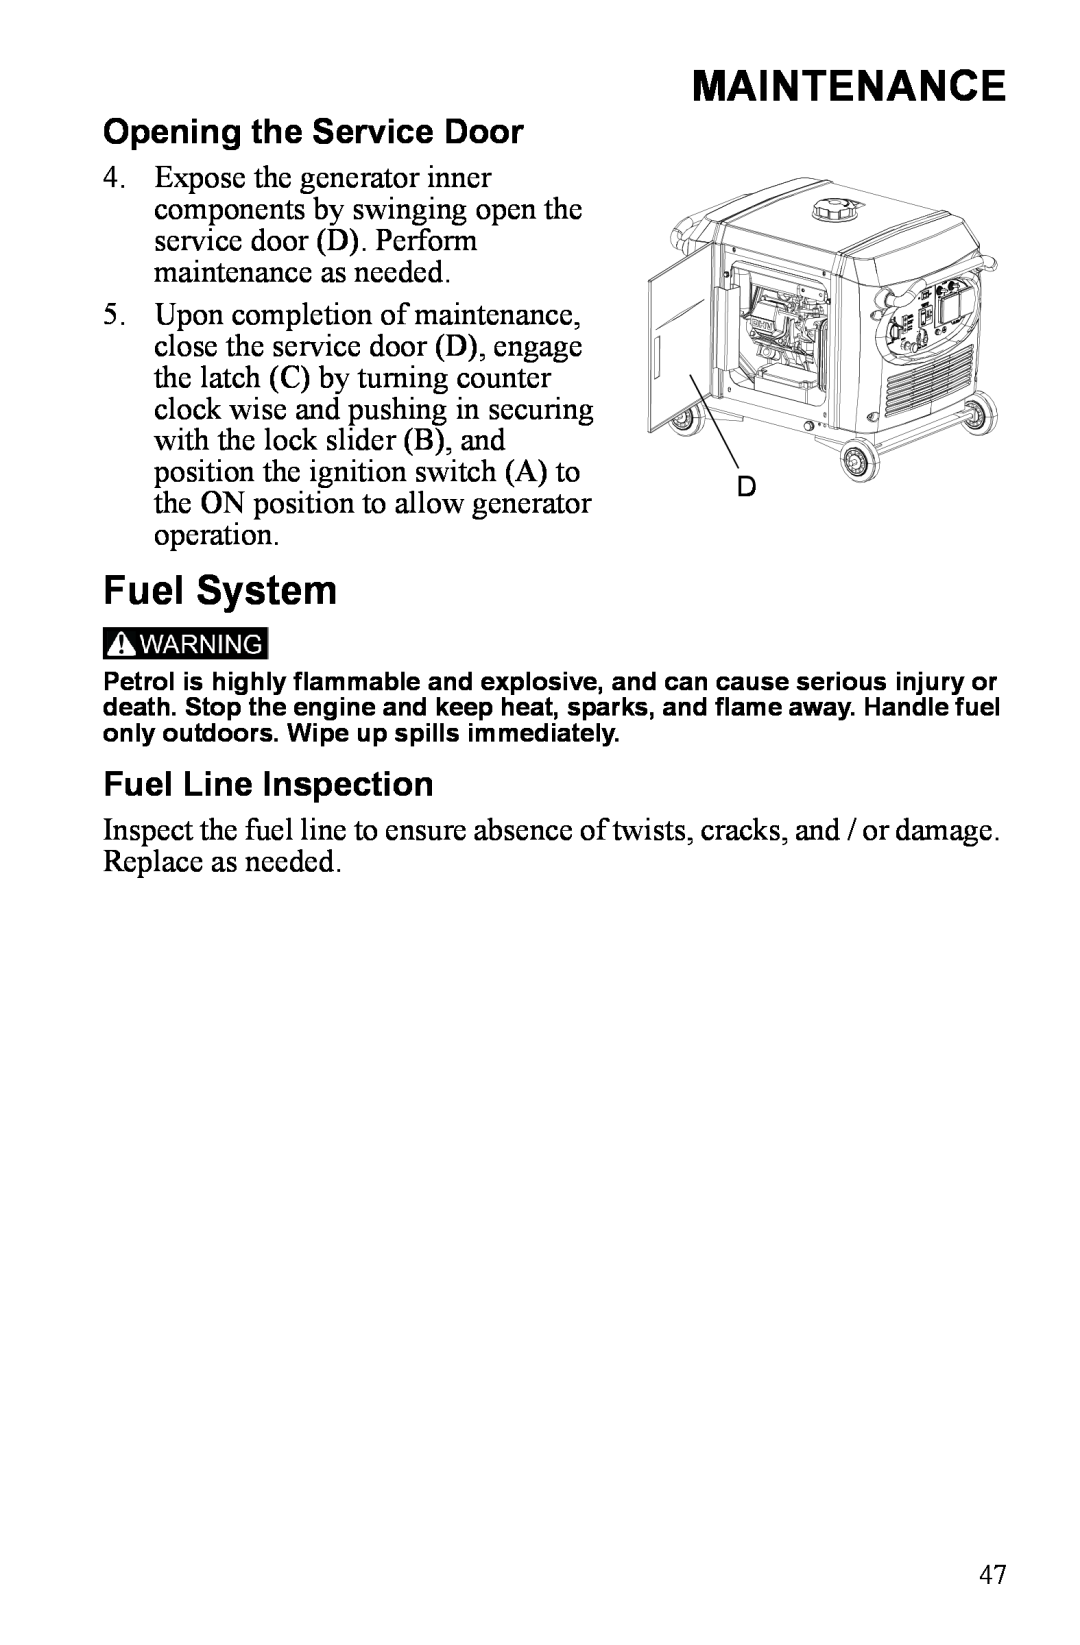 Polaris P3000iE manual Maintenance, Fuel System, Opening the Service Door, Fuel Line Inspection 